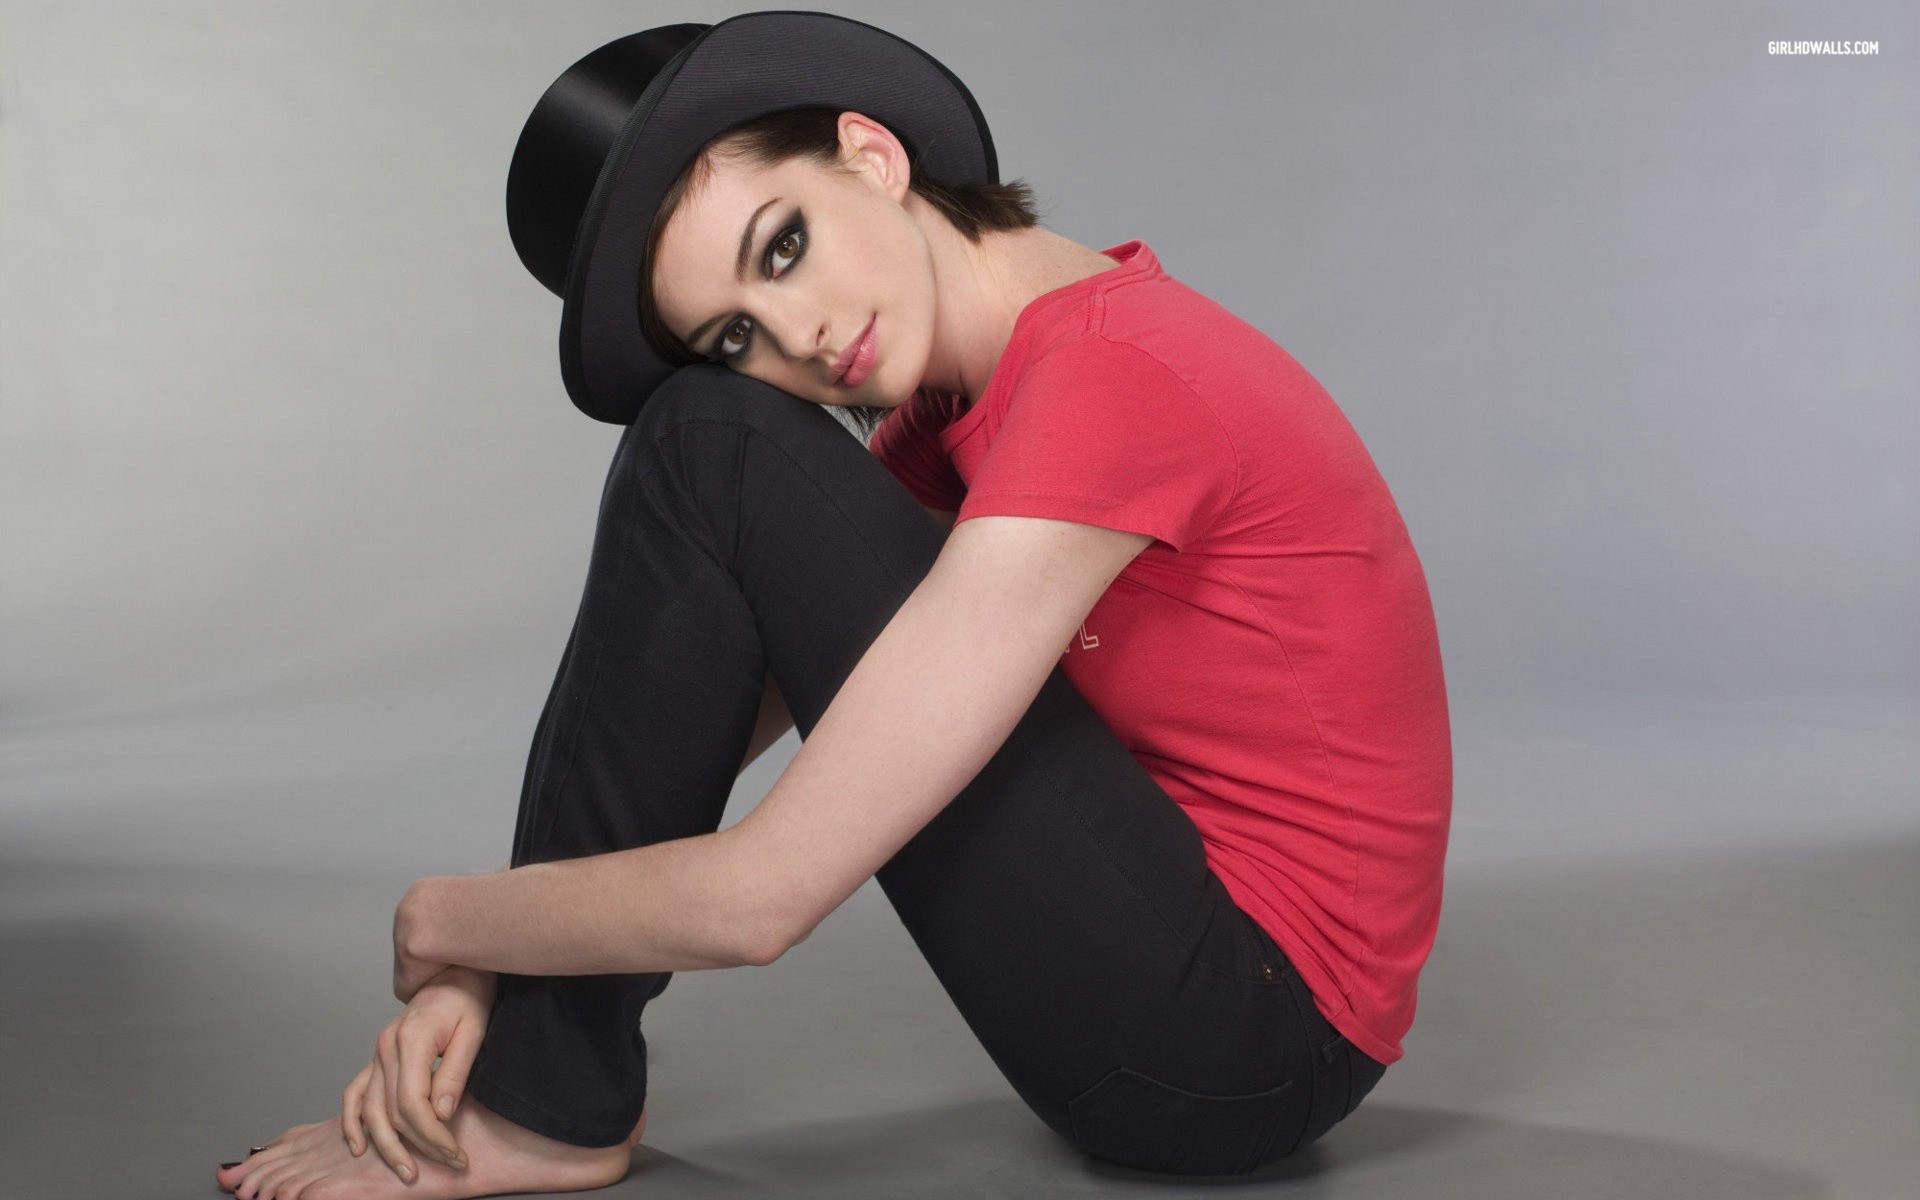 People 1920x1200 Anne Hathaway celebrity actress top hat barefoot hat women with hats makeup looking at viewer women women indoors indoors studio simple background gray background